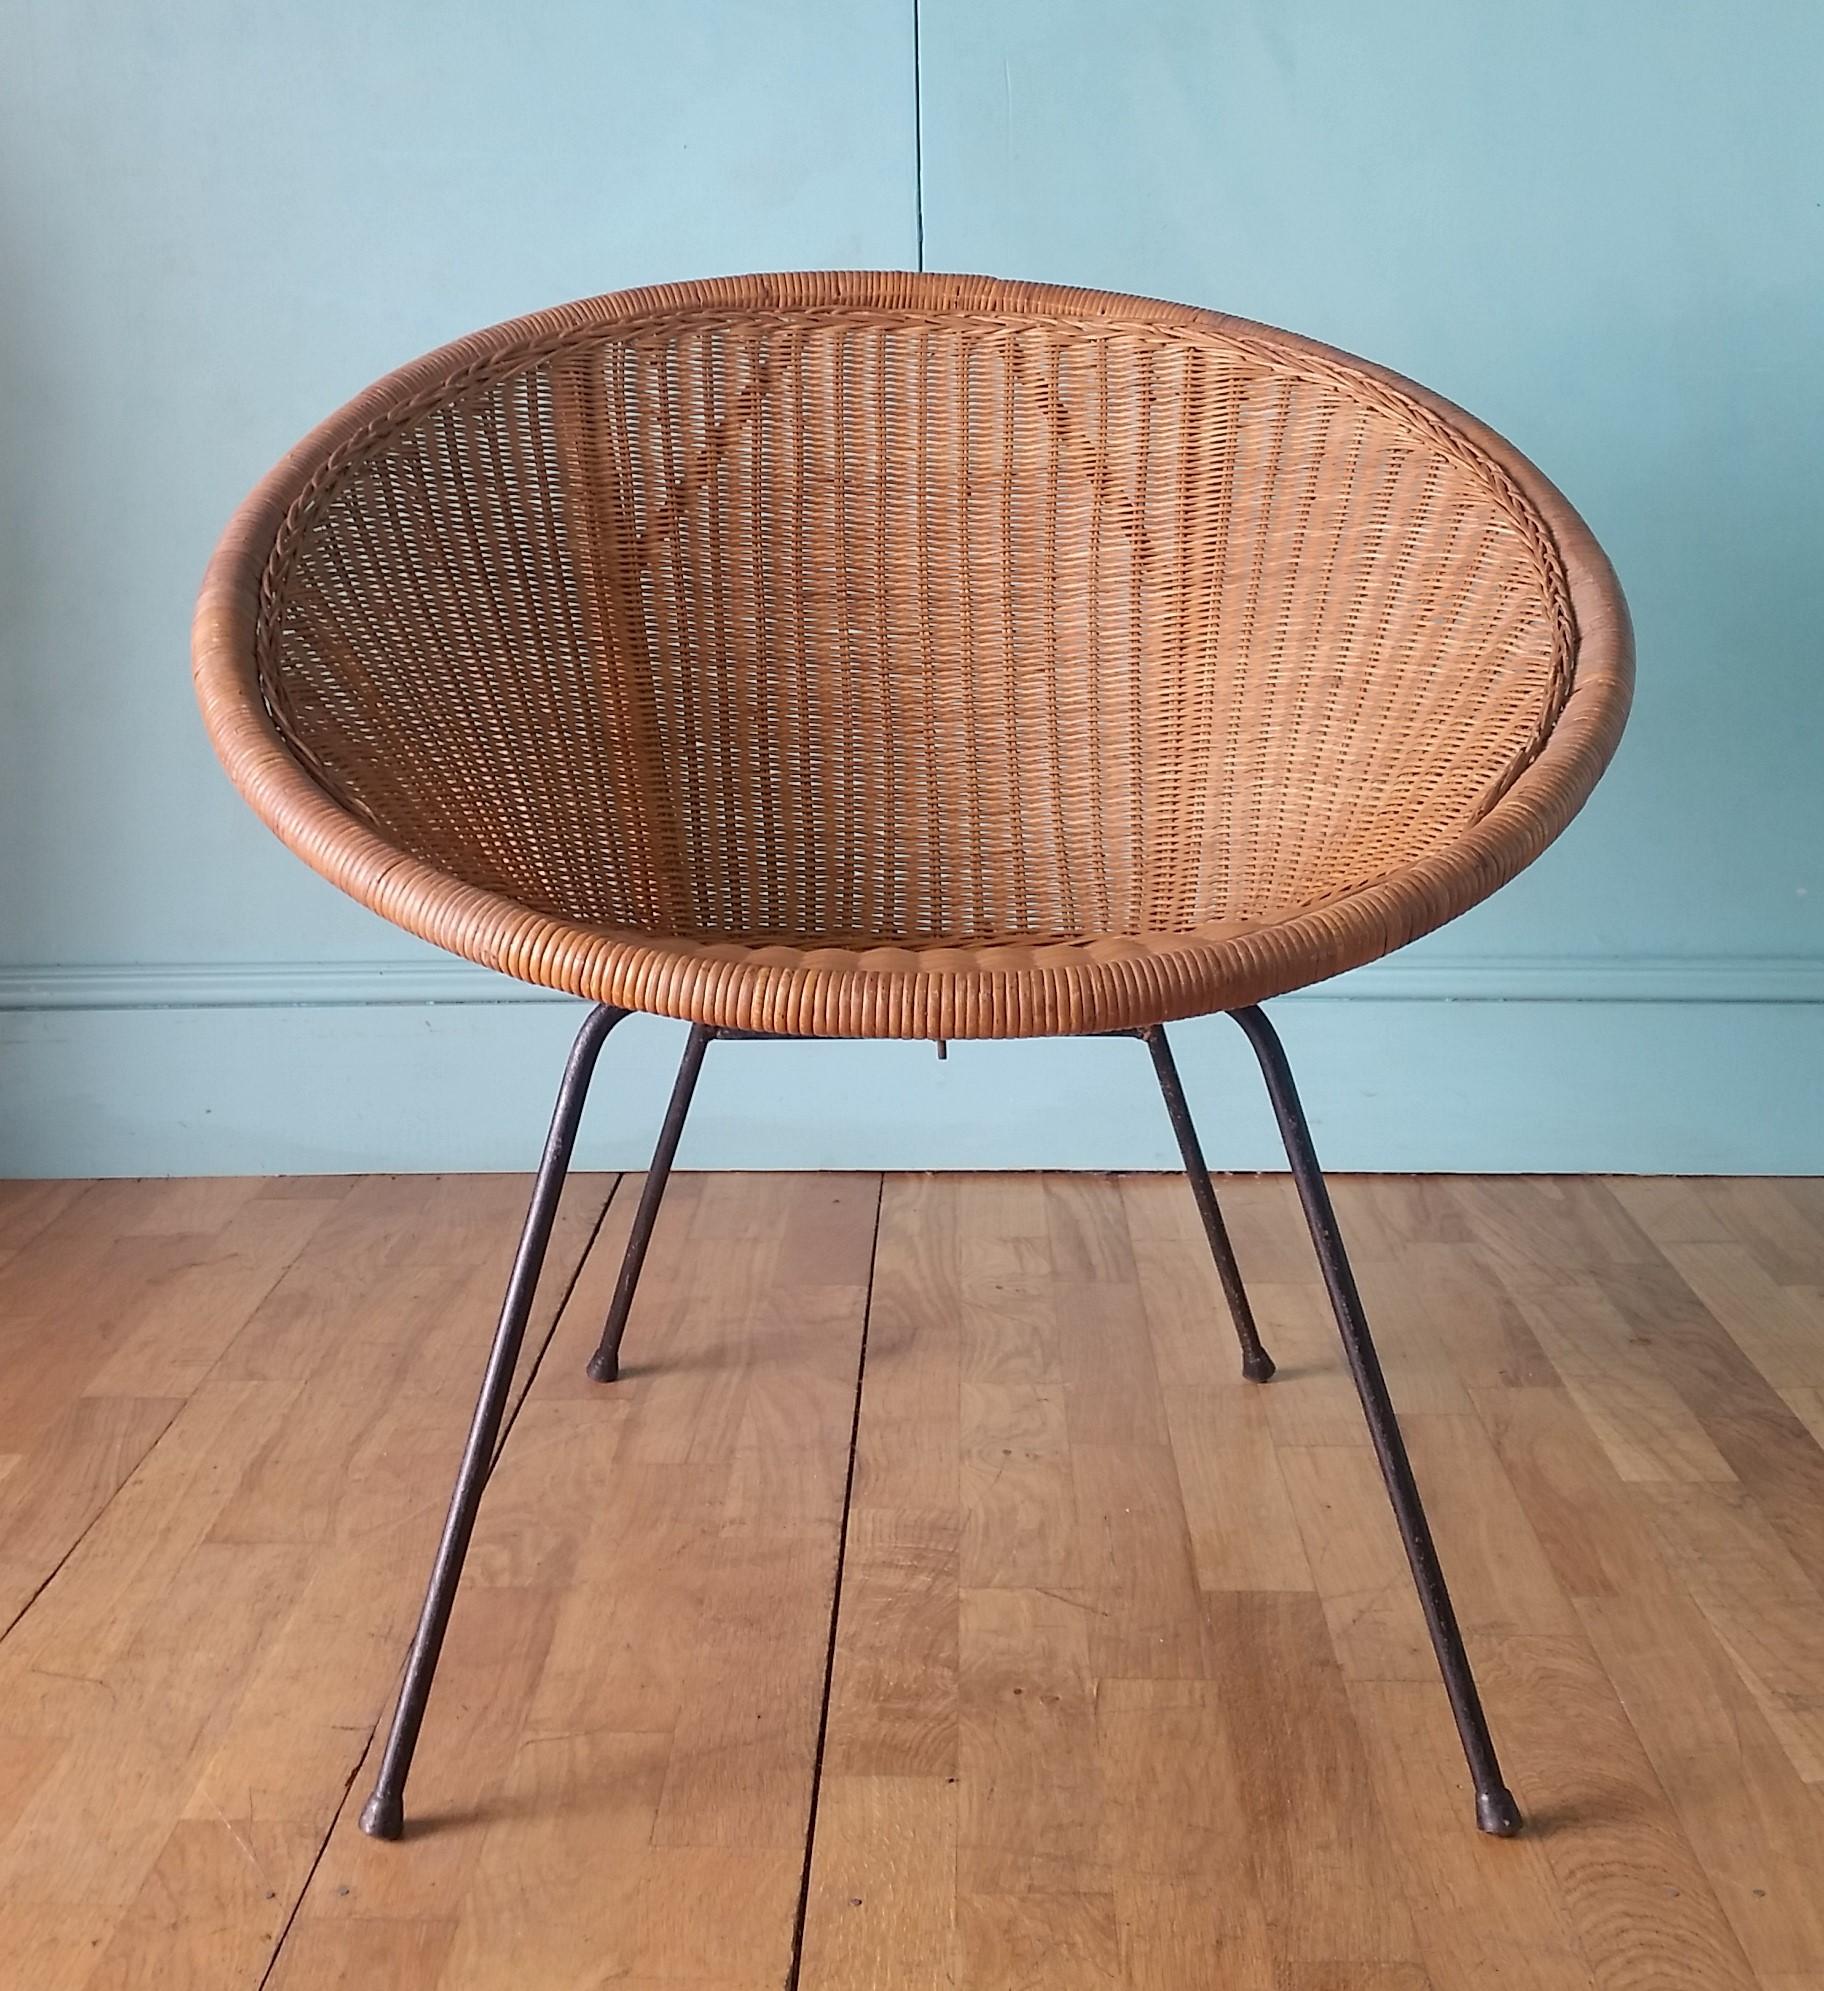 Original and authentic mid-century rattan chair circa 1960's.
Rattan seat supported by steel supports and base all in original condition with makers label to the rear.
In lovely condition with the rattan in good condition showing a nice authentic